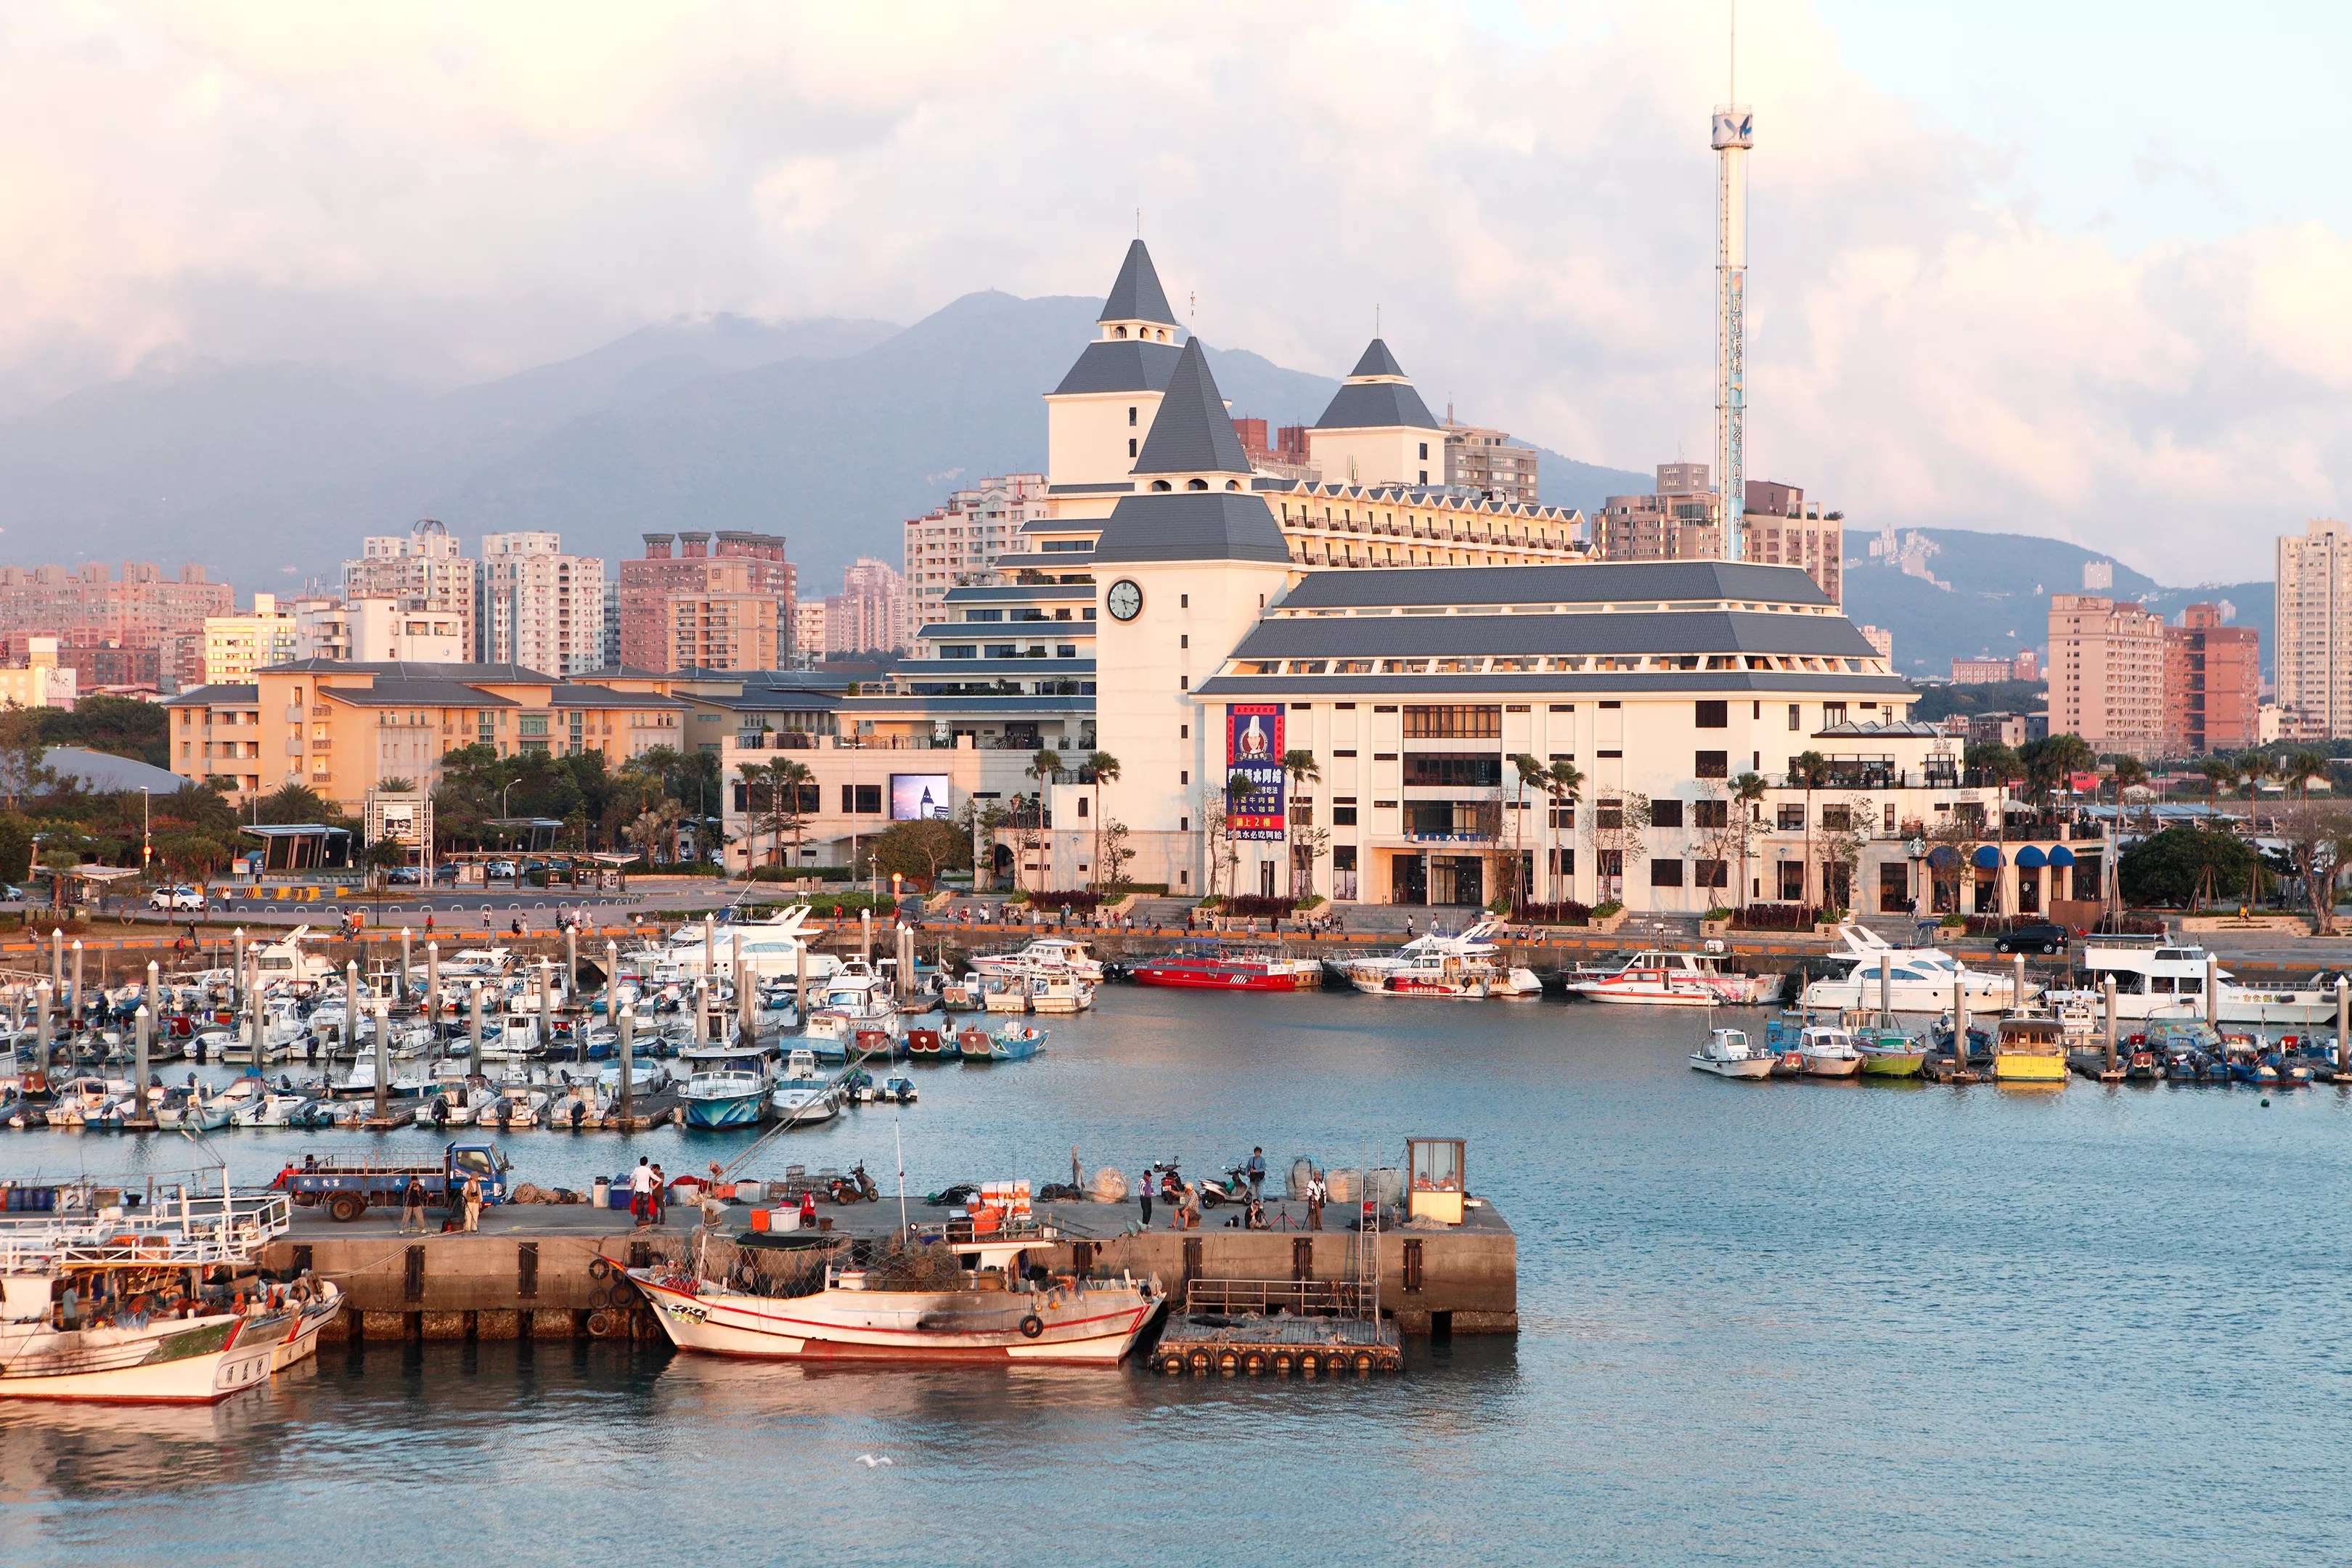 Tamsui Fisherman's Wharf in Taiwan, East Asia | Architecture - Rated 3.5